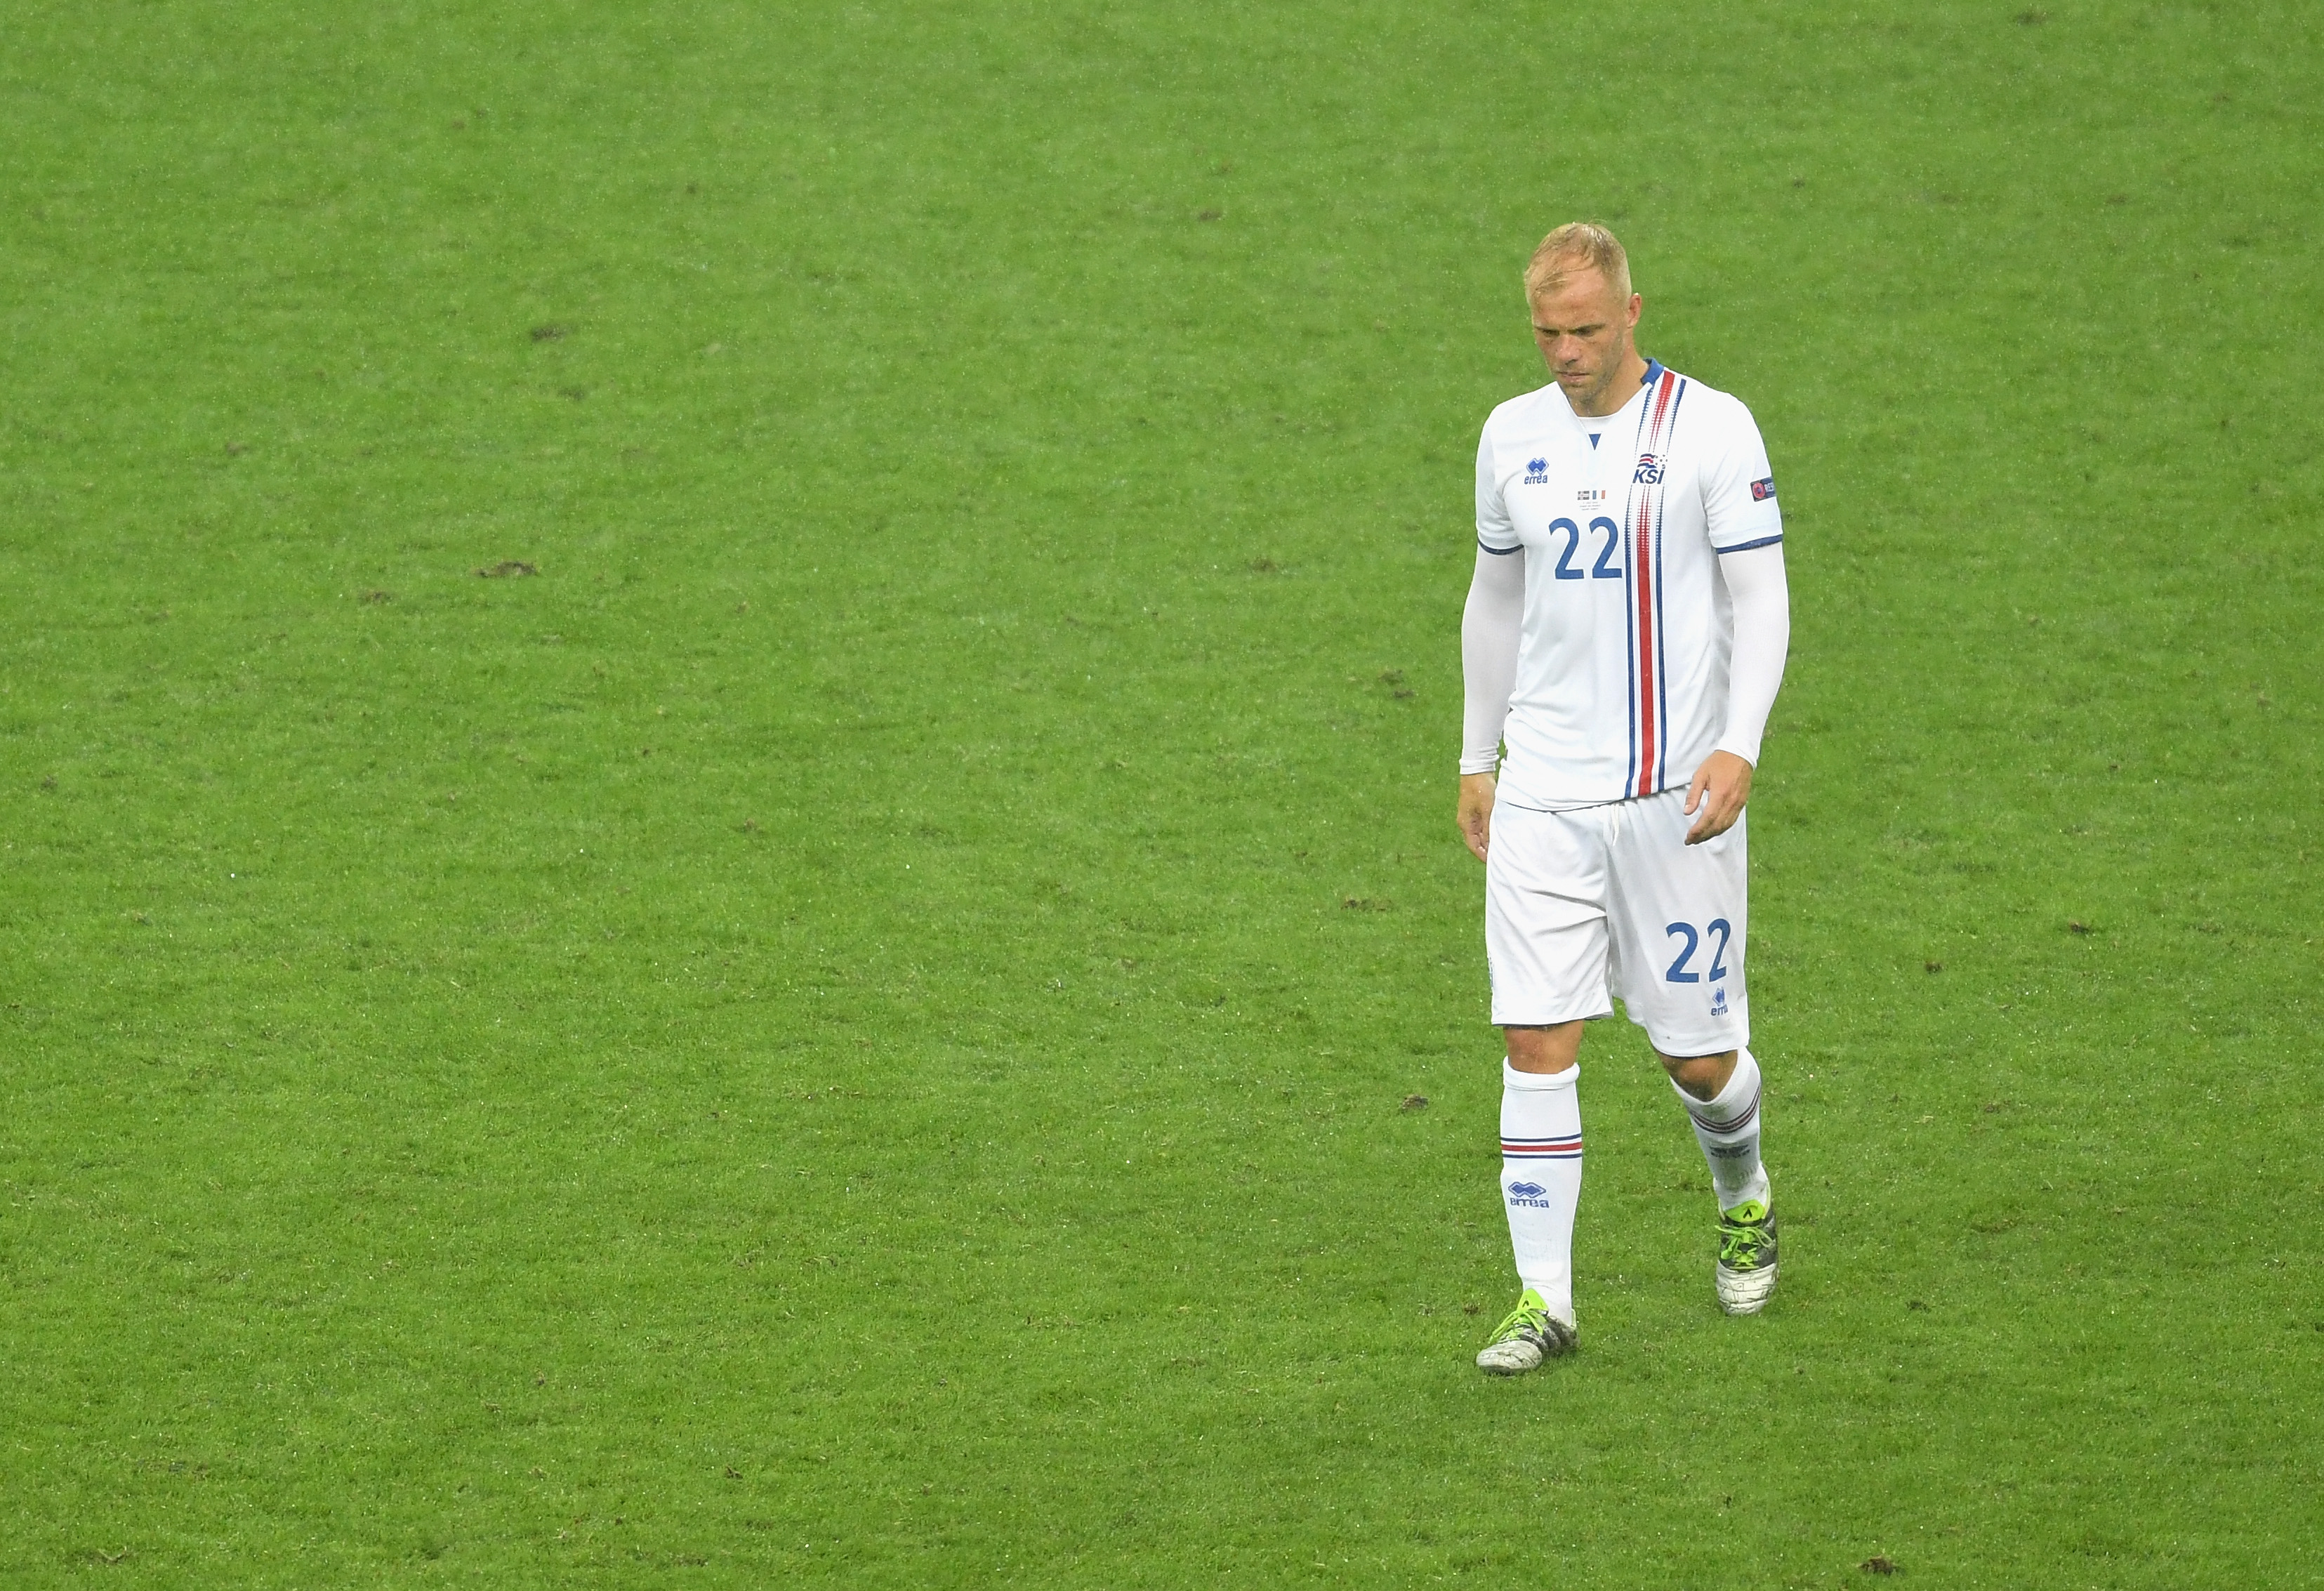 PARIS, FRANCE - JULY 03: Eidur Gudjohnsen of Iceland leaves the pitch after his team's 2-5 defeat in the UEFA EURO 2016 quarter final match between France and Iceland at Stade de France on July 3, 2016 in Paris, France.  (Photo by Michael Regan/Getty Images)